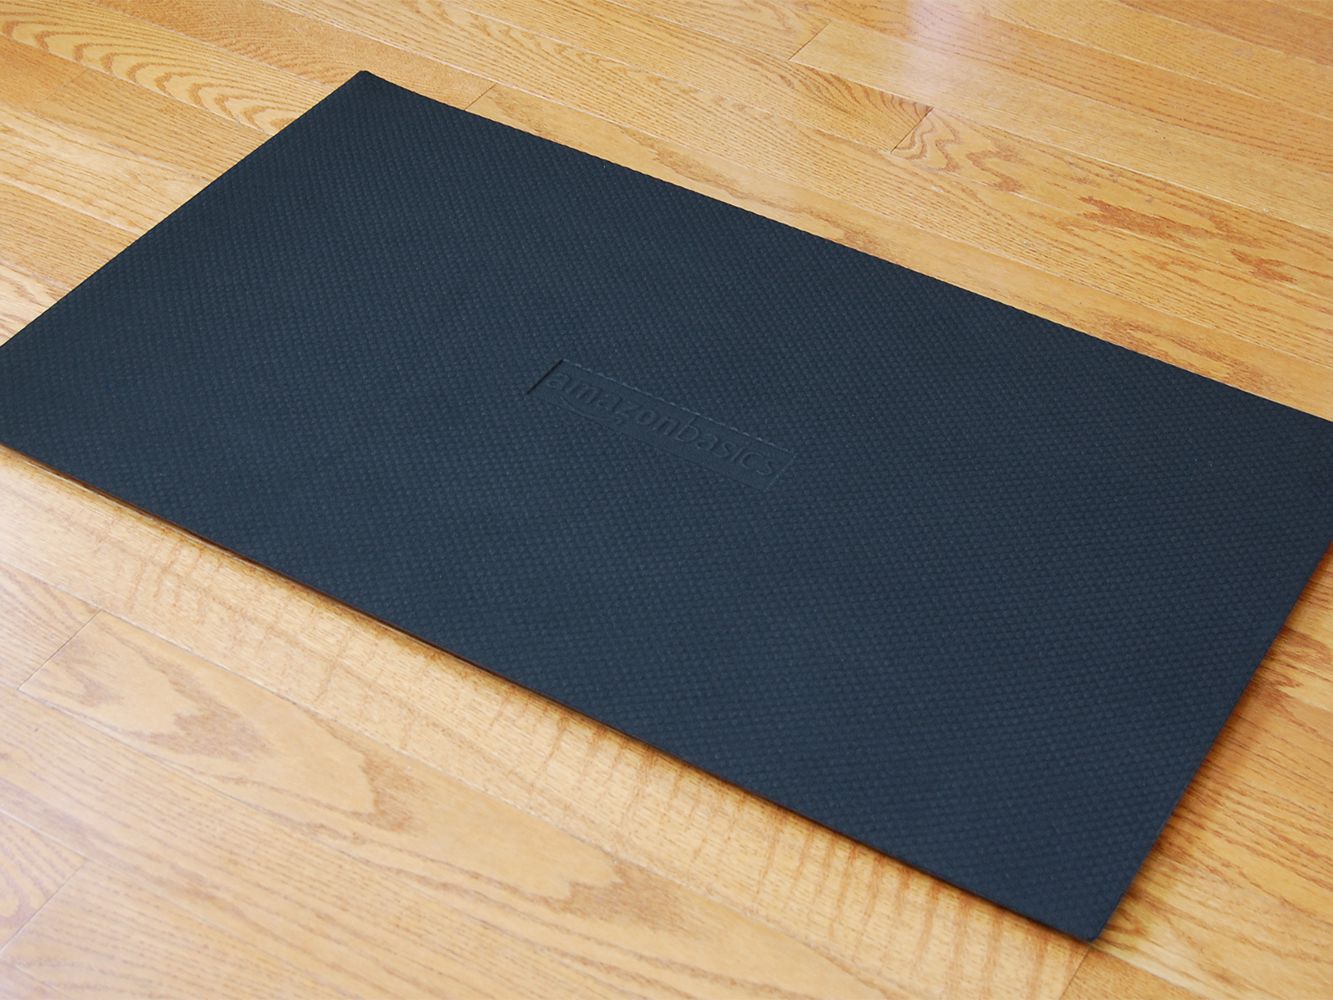 What Are Anti Fatigue Mats and Why Should You Choose them?